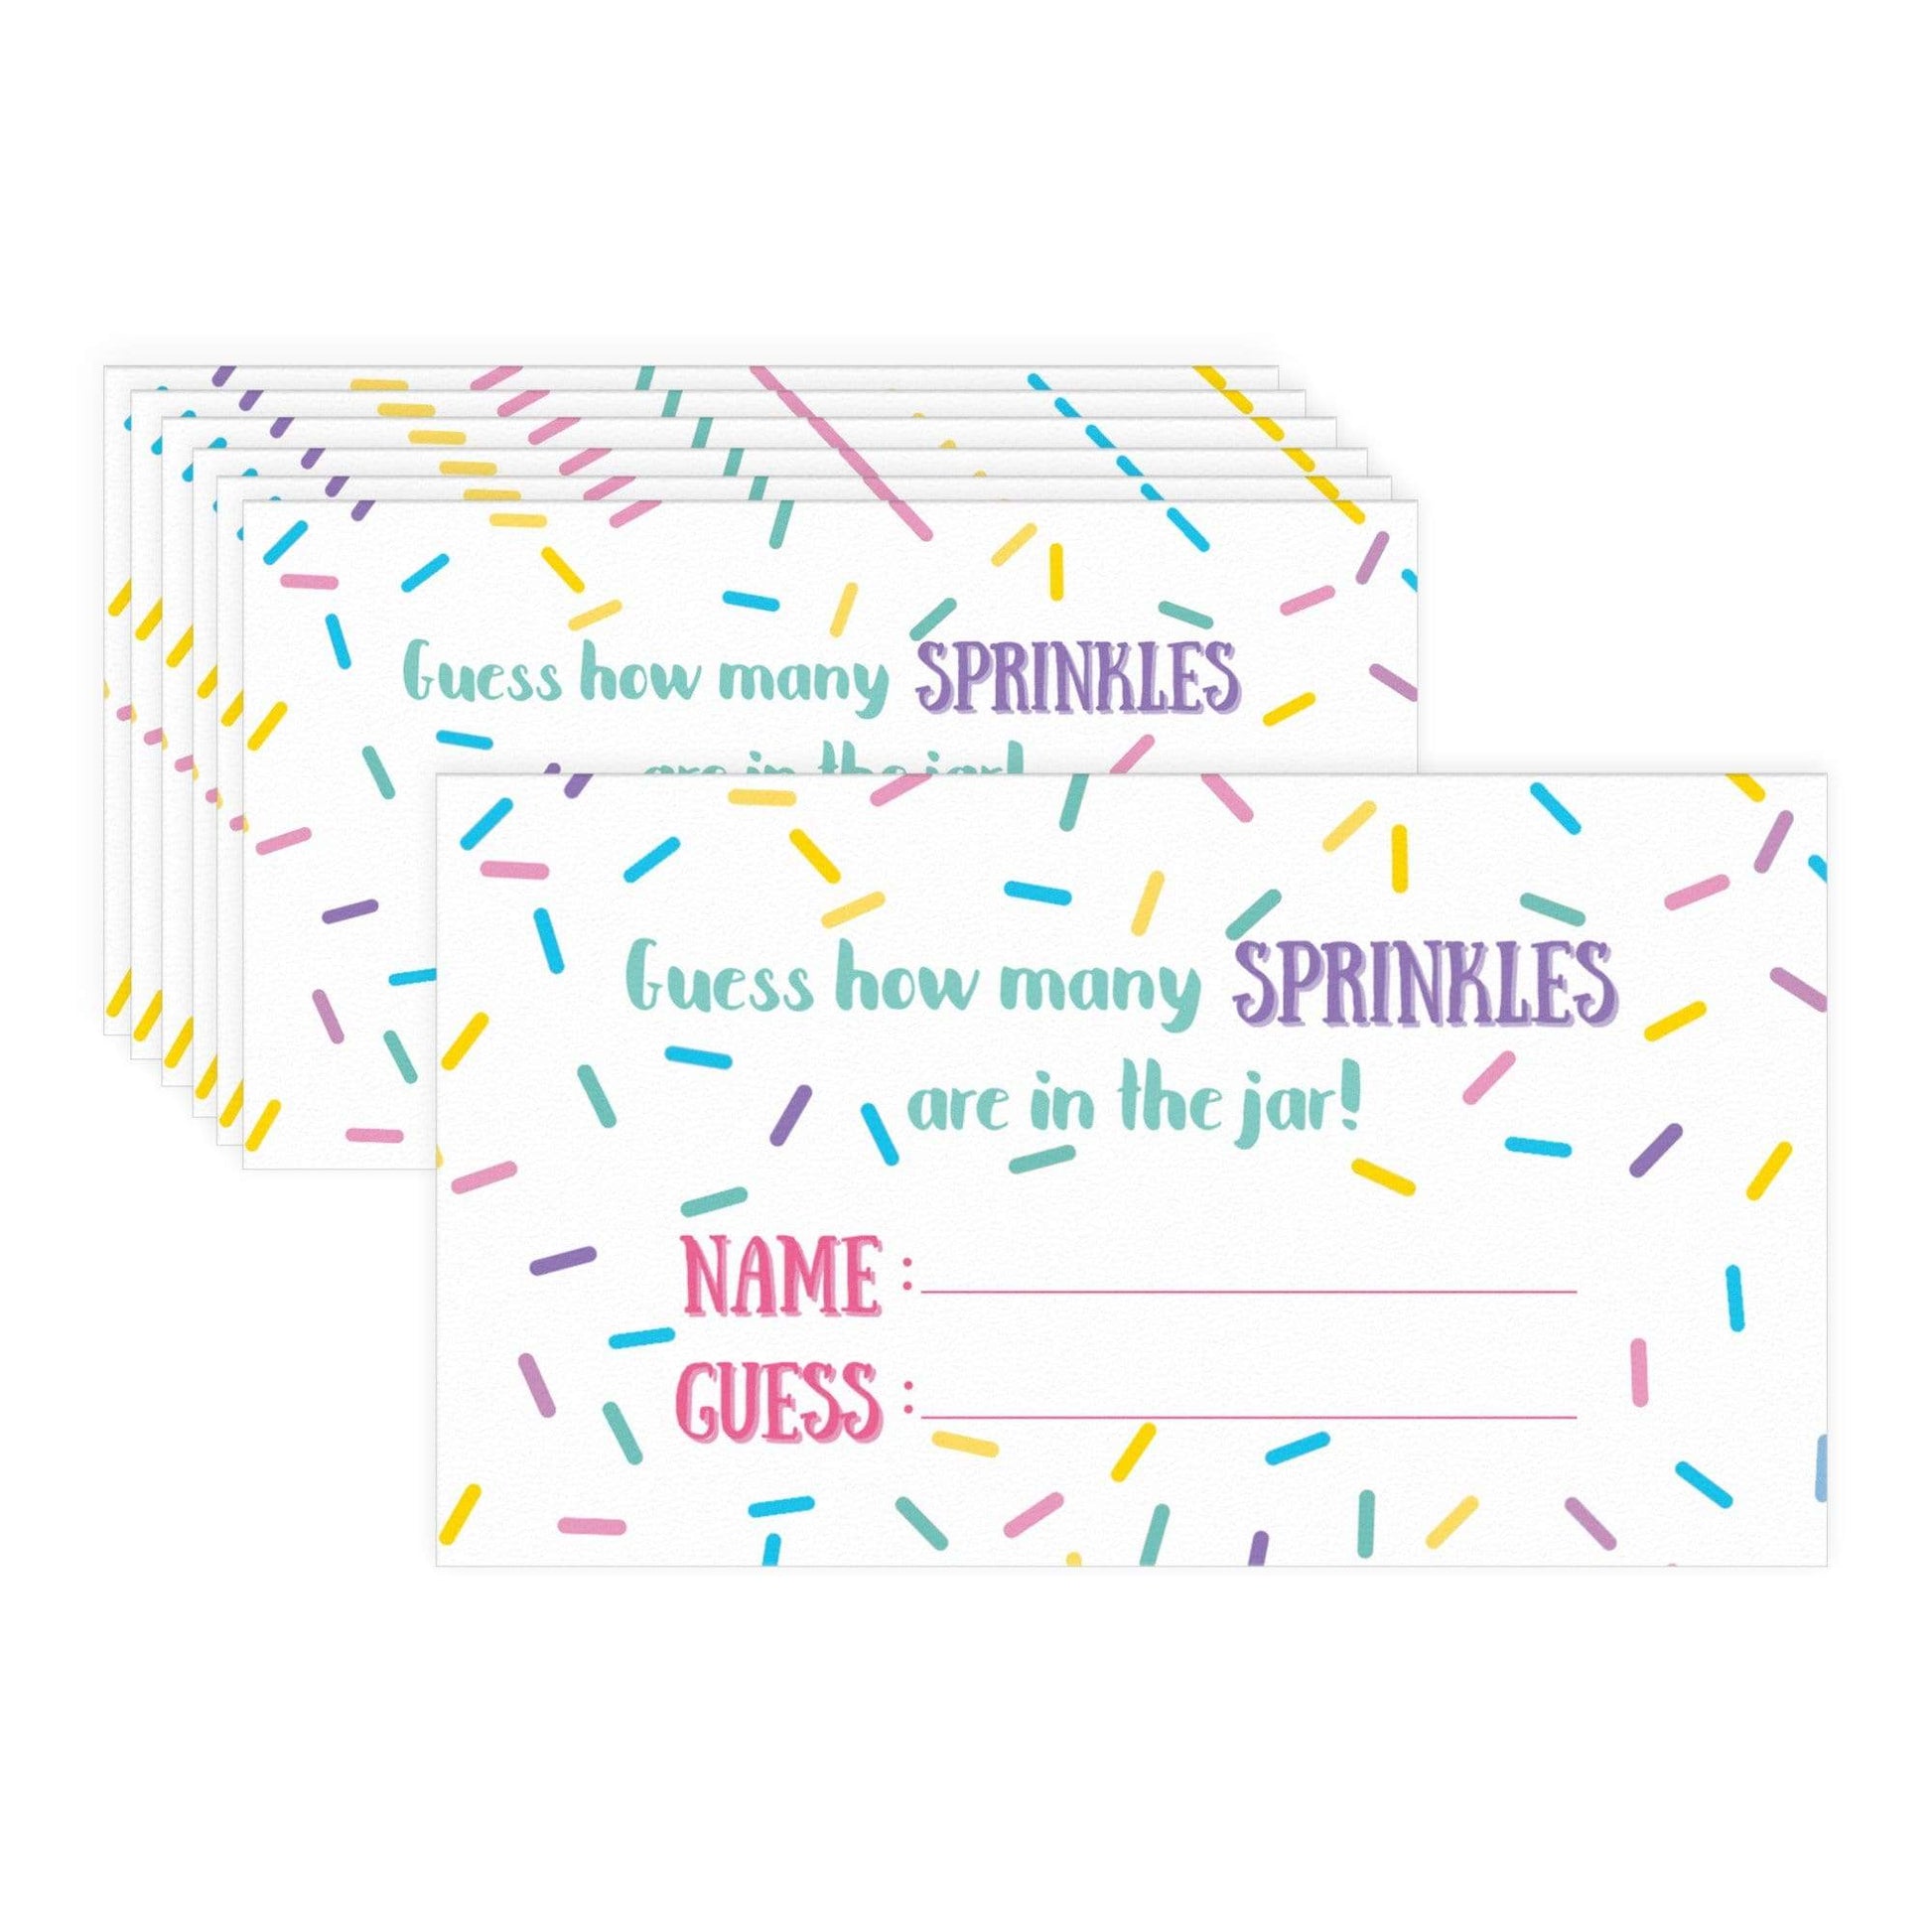 Extra Guess Cards ONLY (No Sign) How Many Sprinkles in the Jar Party Game